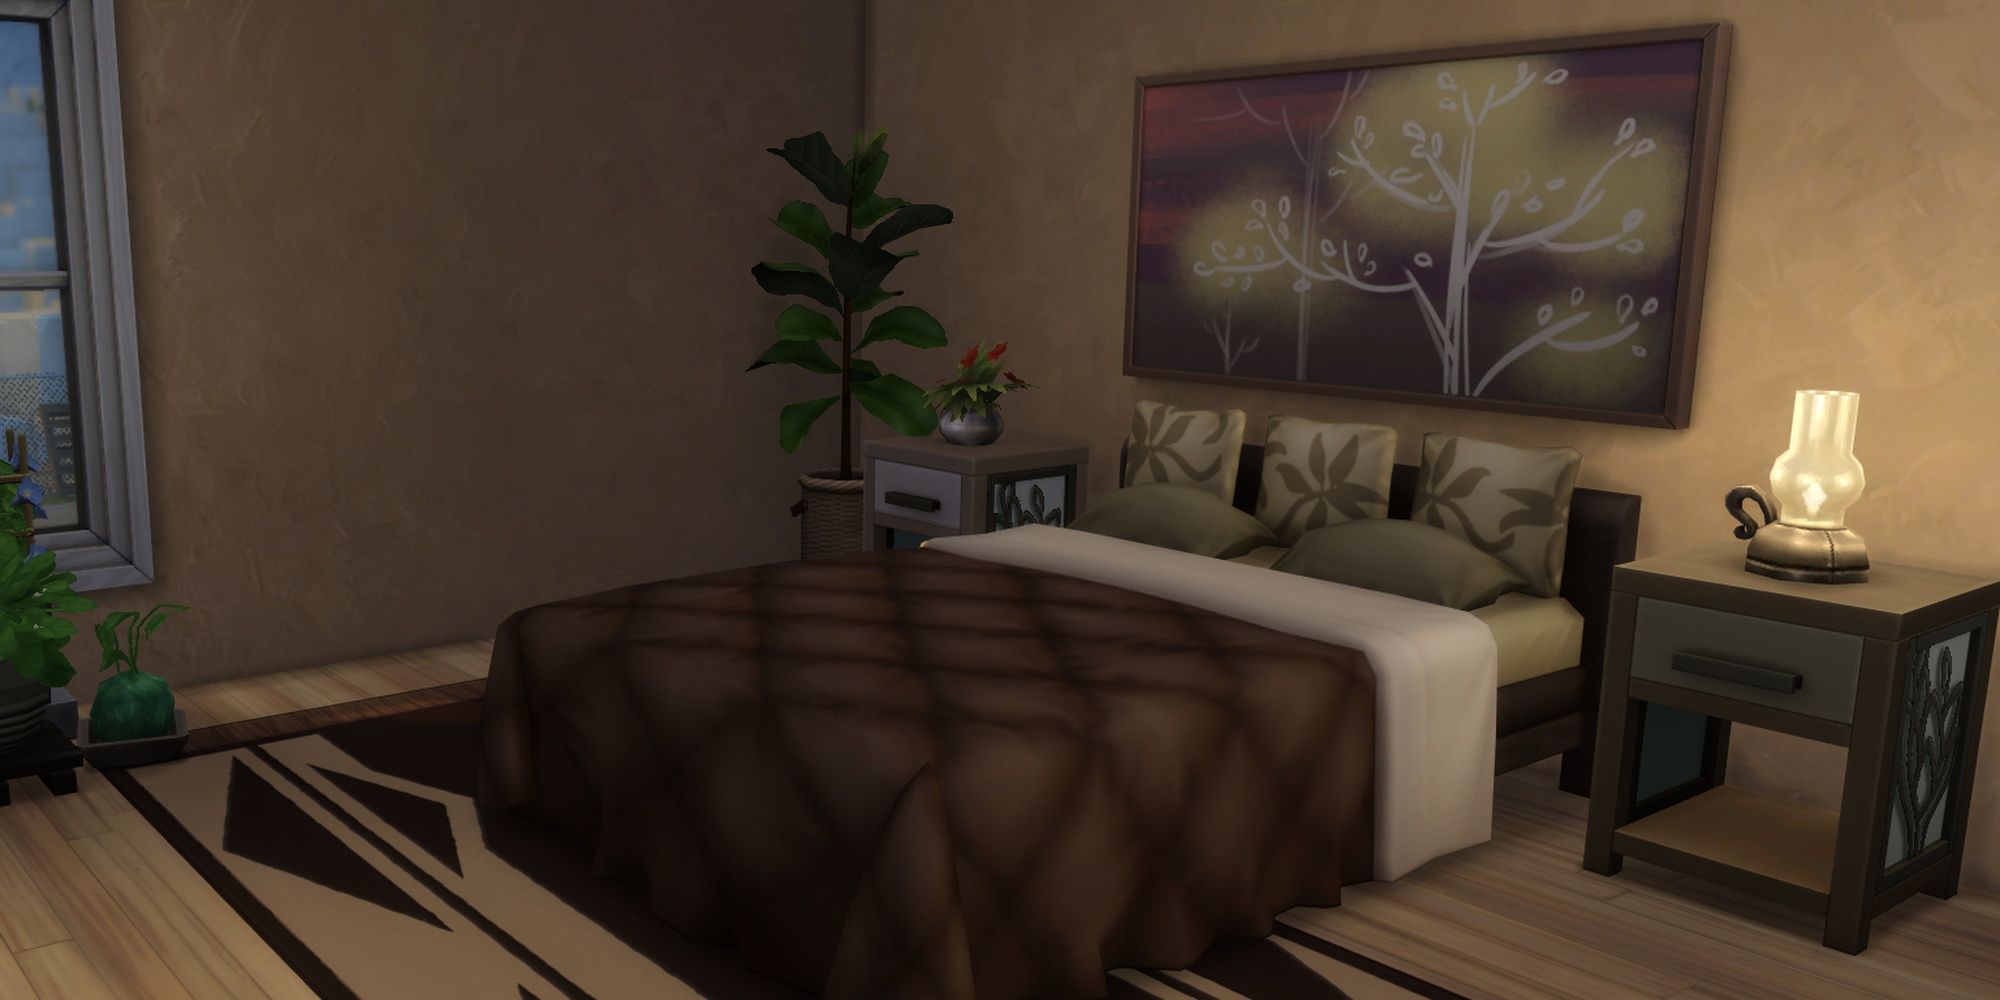 A soft, fluffy bed with a brown quilt and throw pillows in a Sims 4 bedroom.